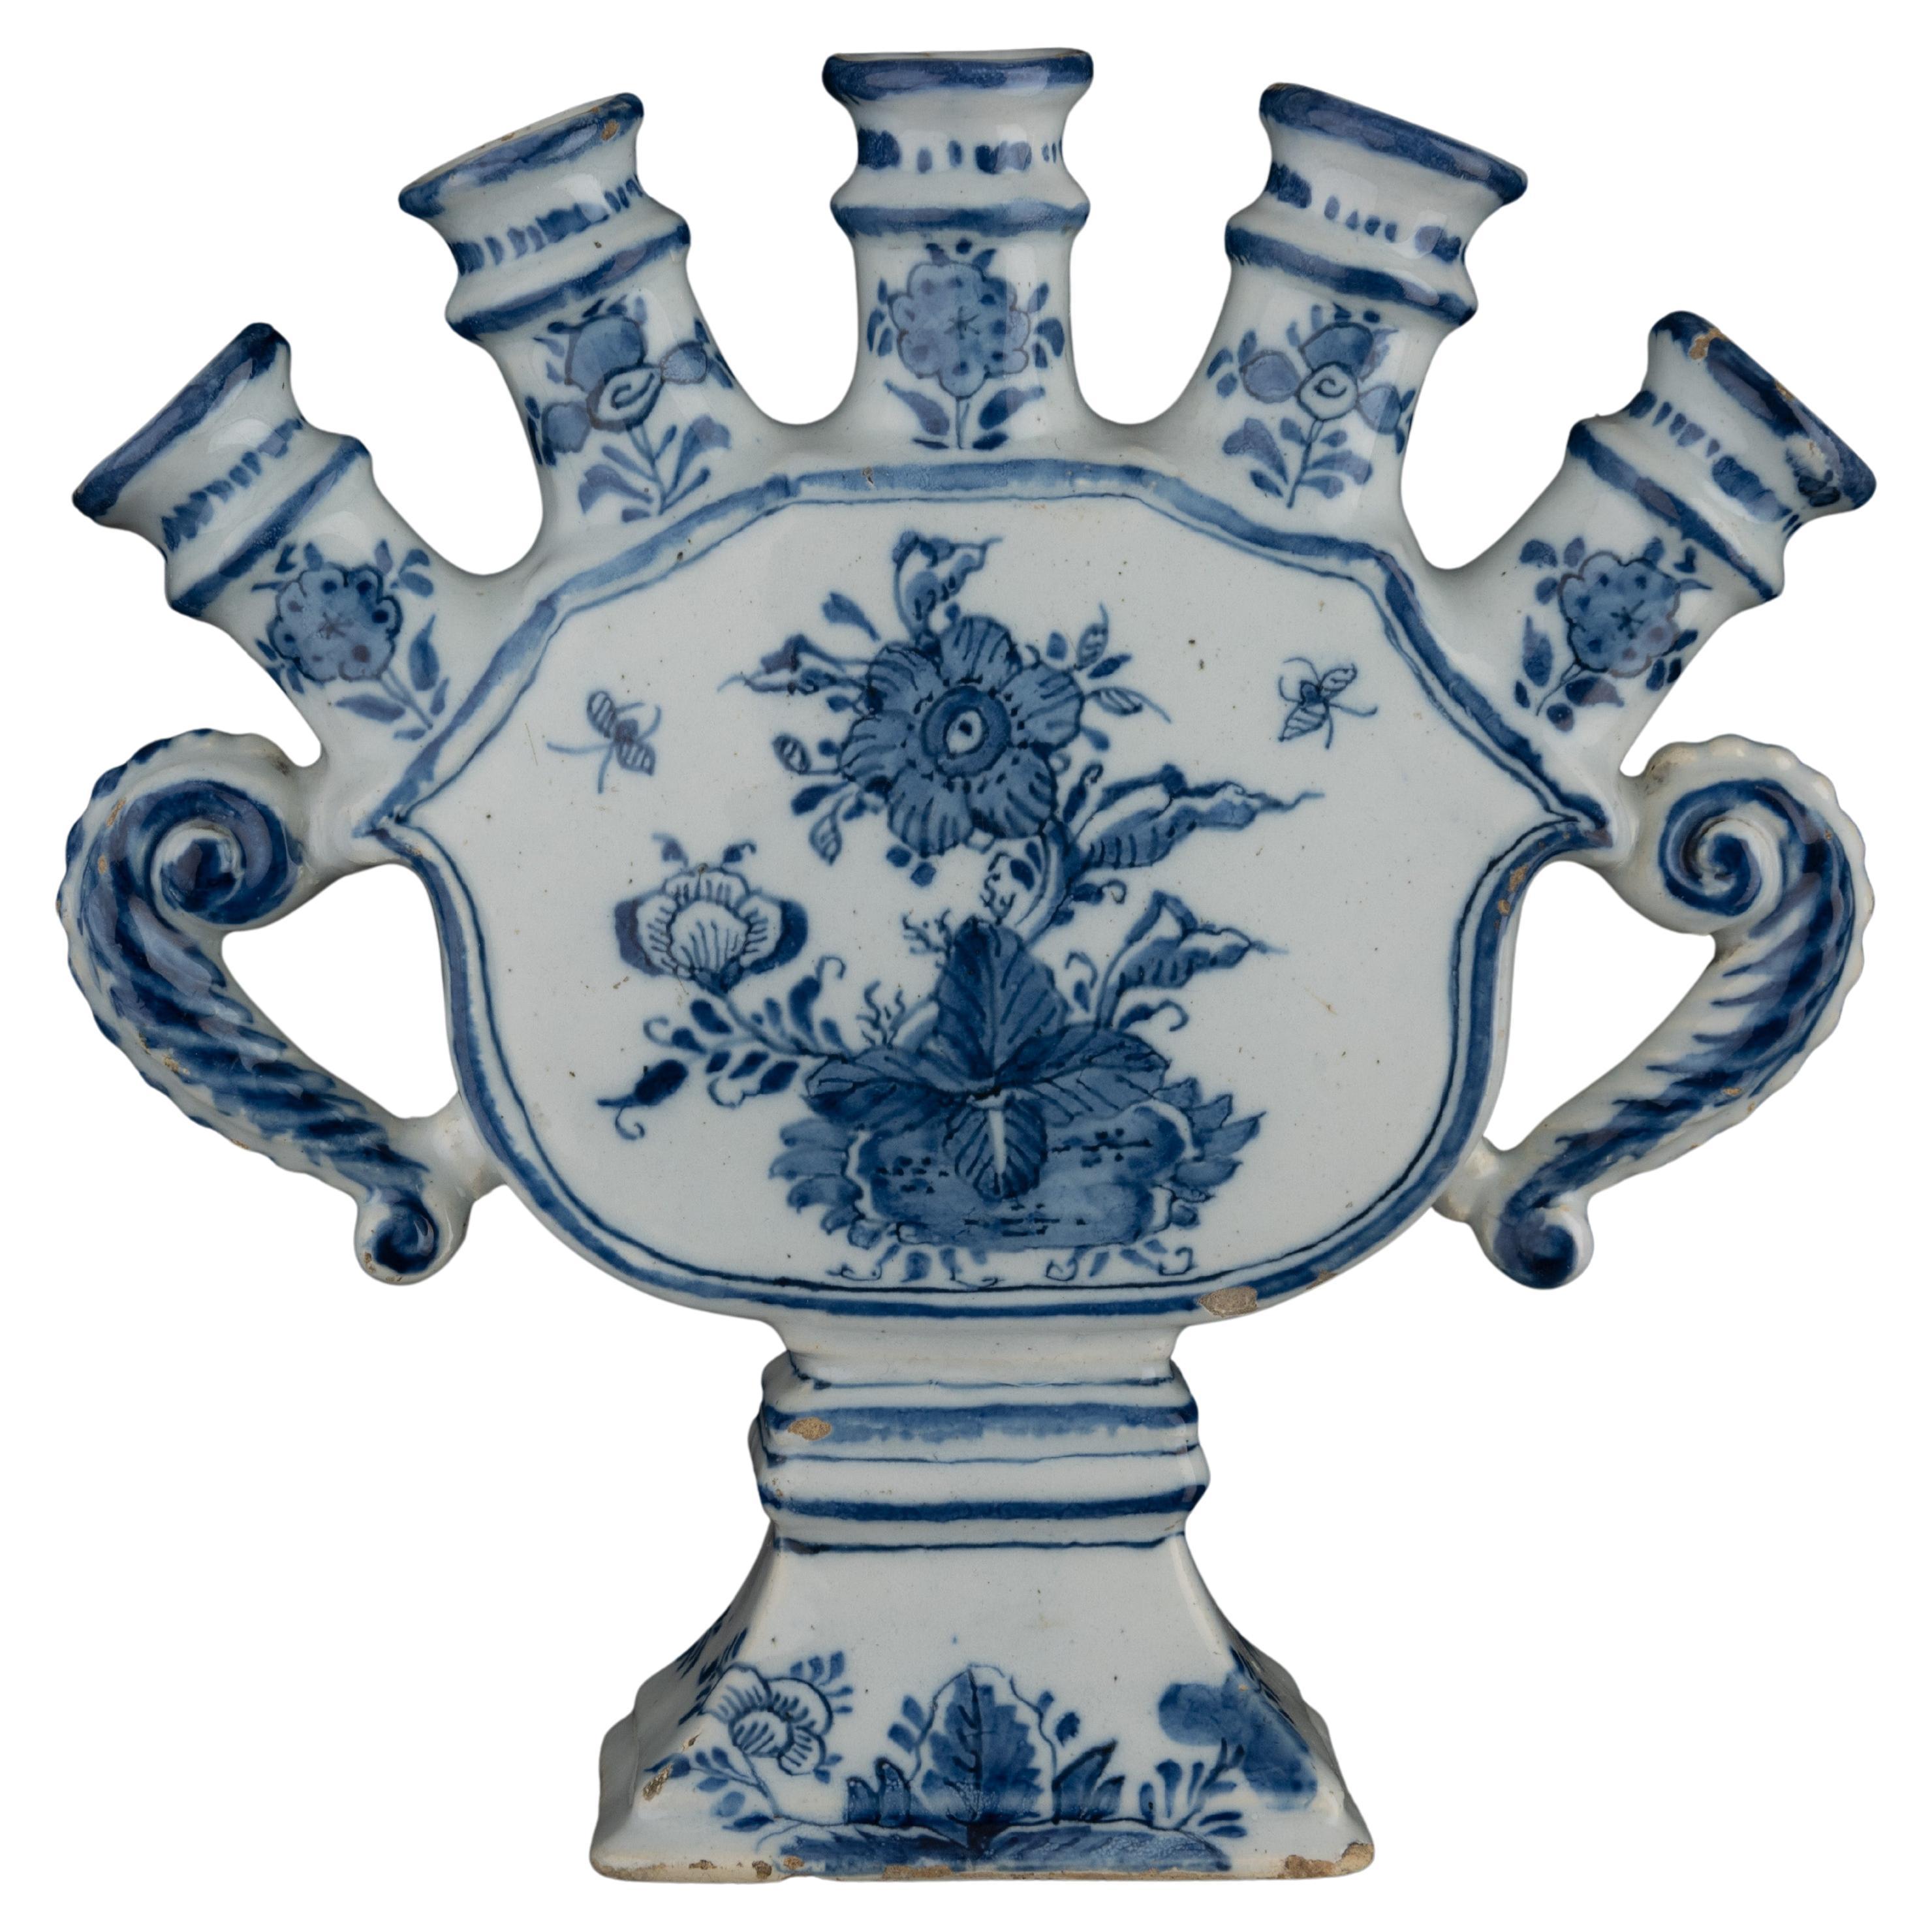 Delft Blue and White Flower Vase with Spouts 1720-1730 Tulip Vase